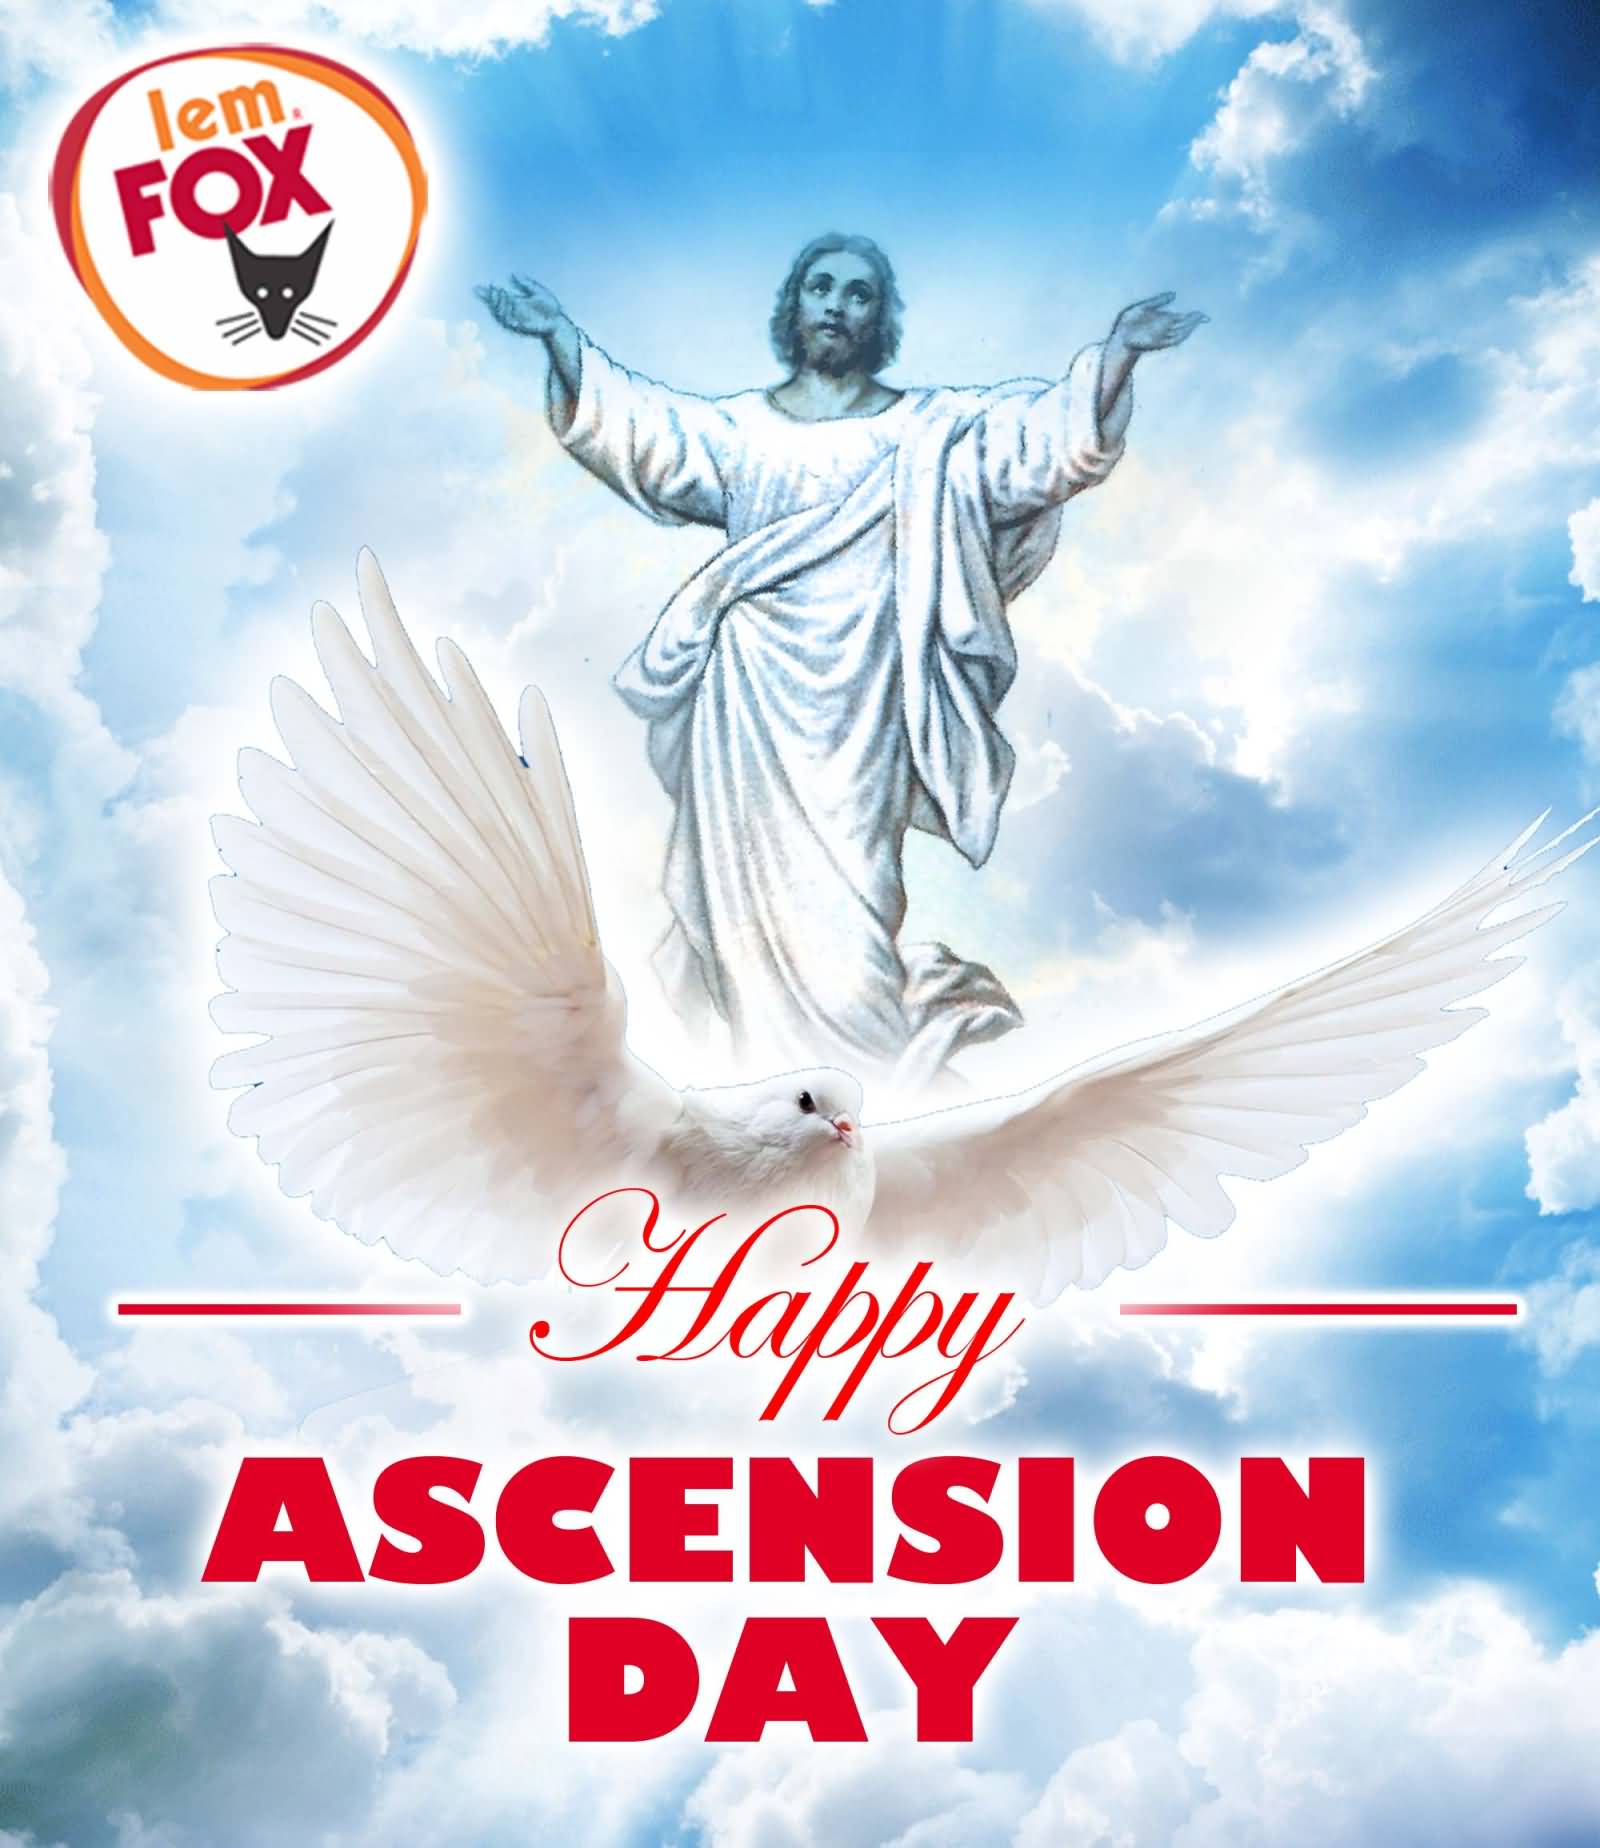 Happy Ascension Day 2017 Image